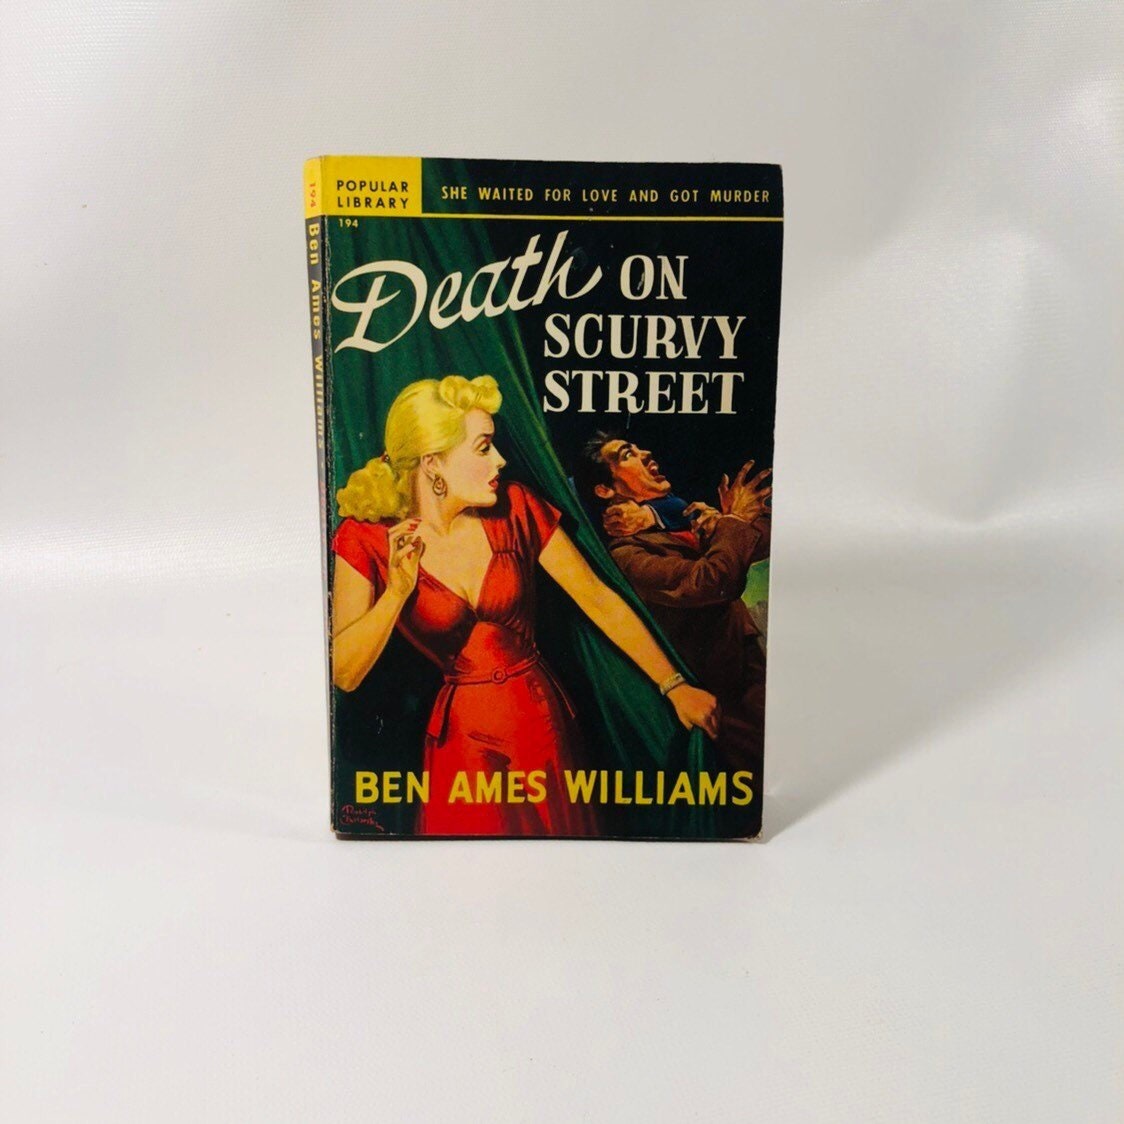 Vintage Paperback Death on Scurvy Street by Ben Ames Williams 1949 Popular Library Number 194